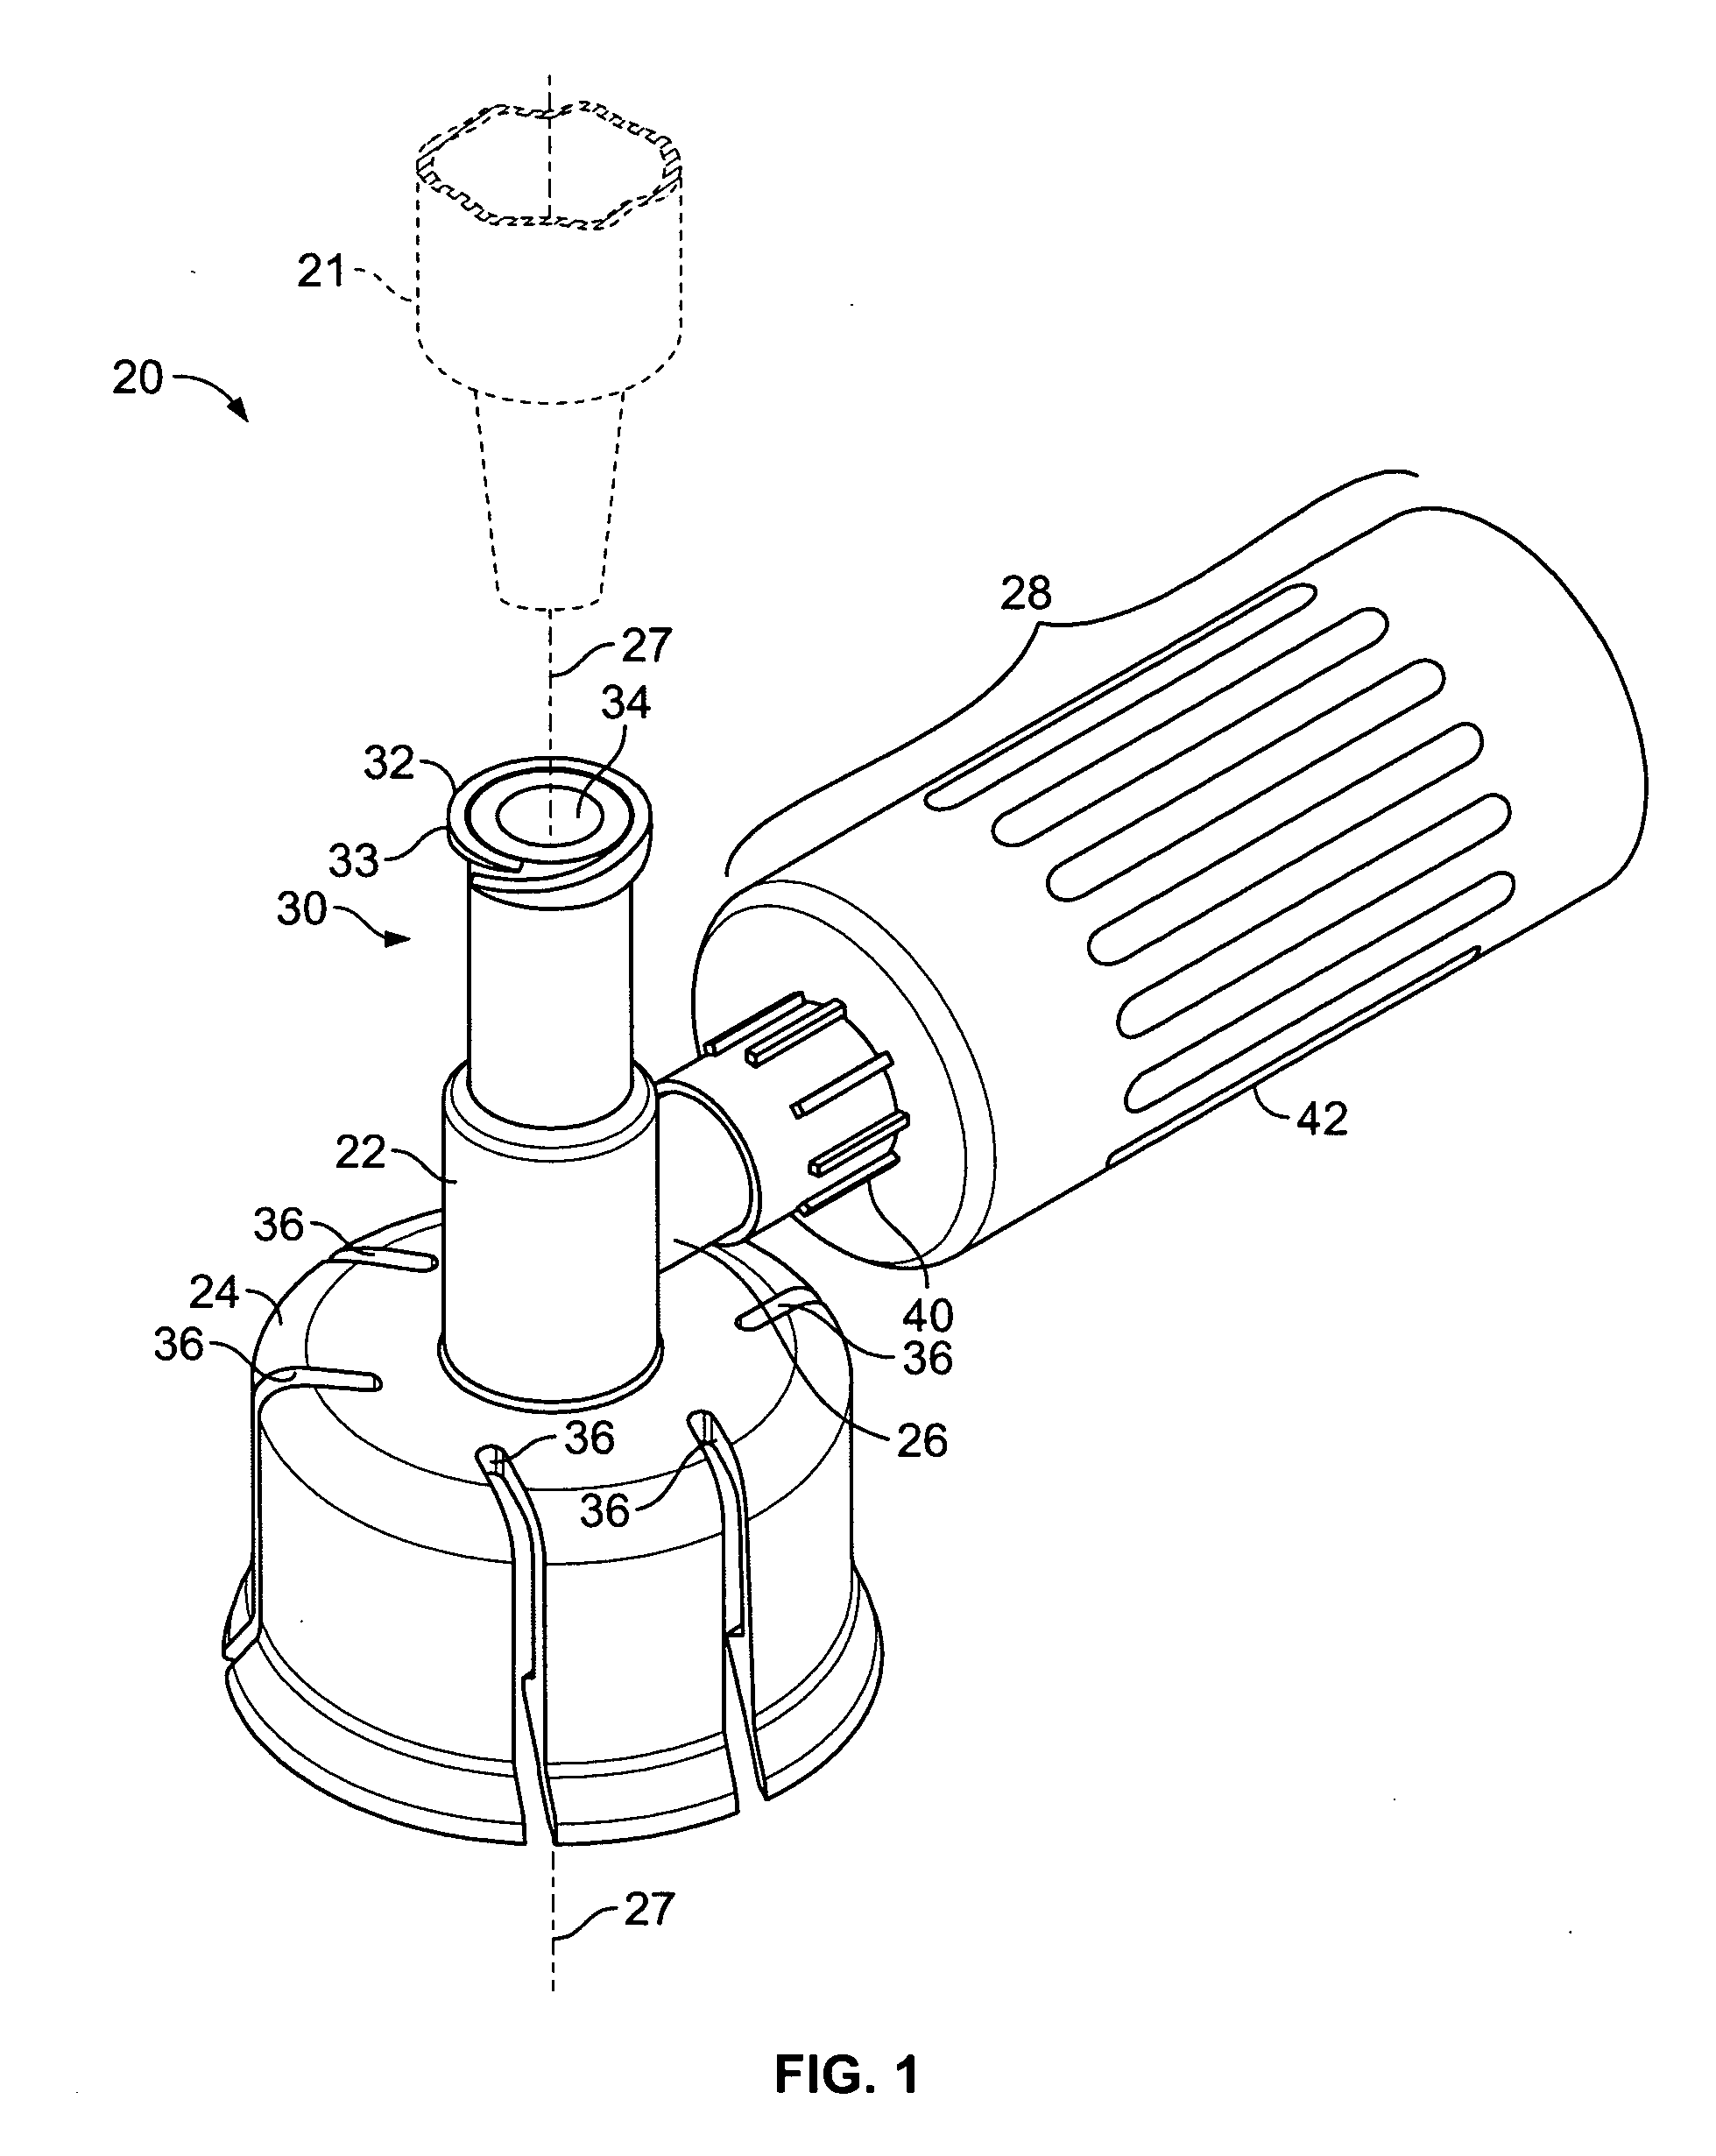 Pressure equalizing device for vial access